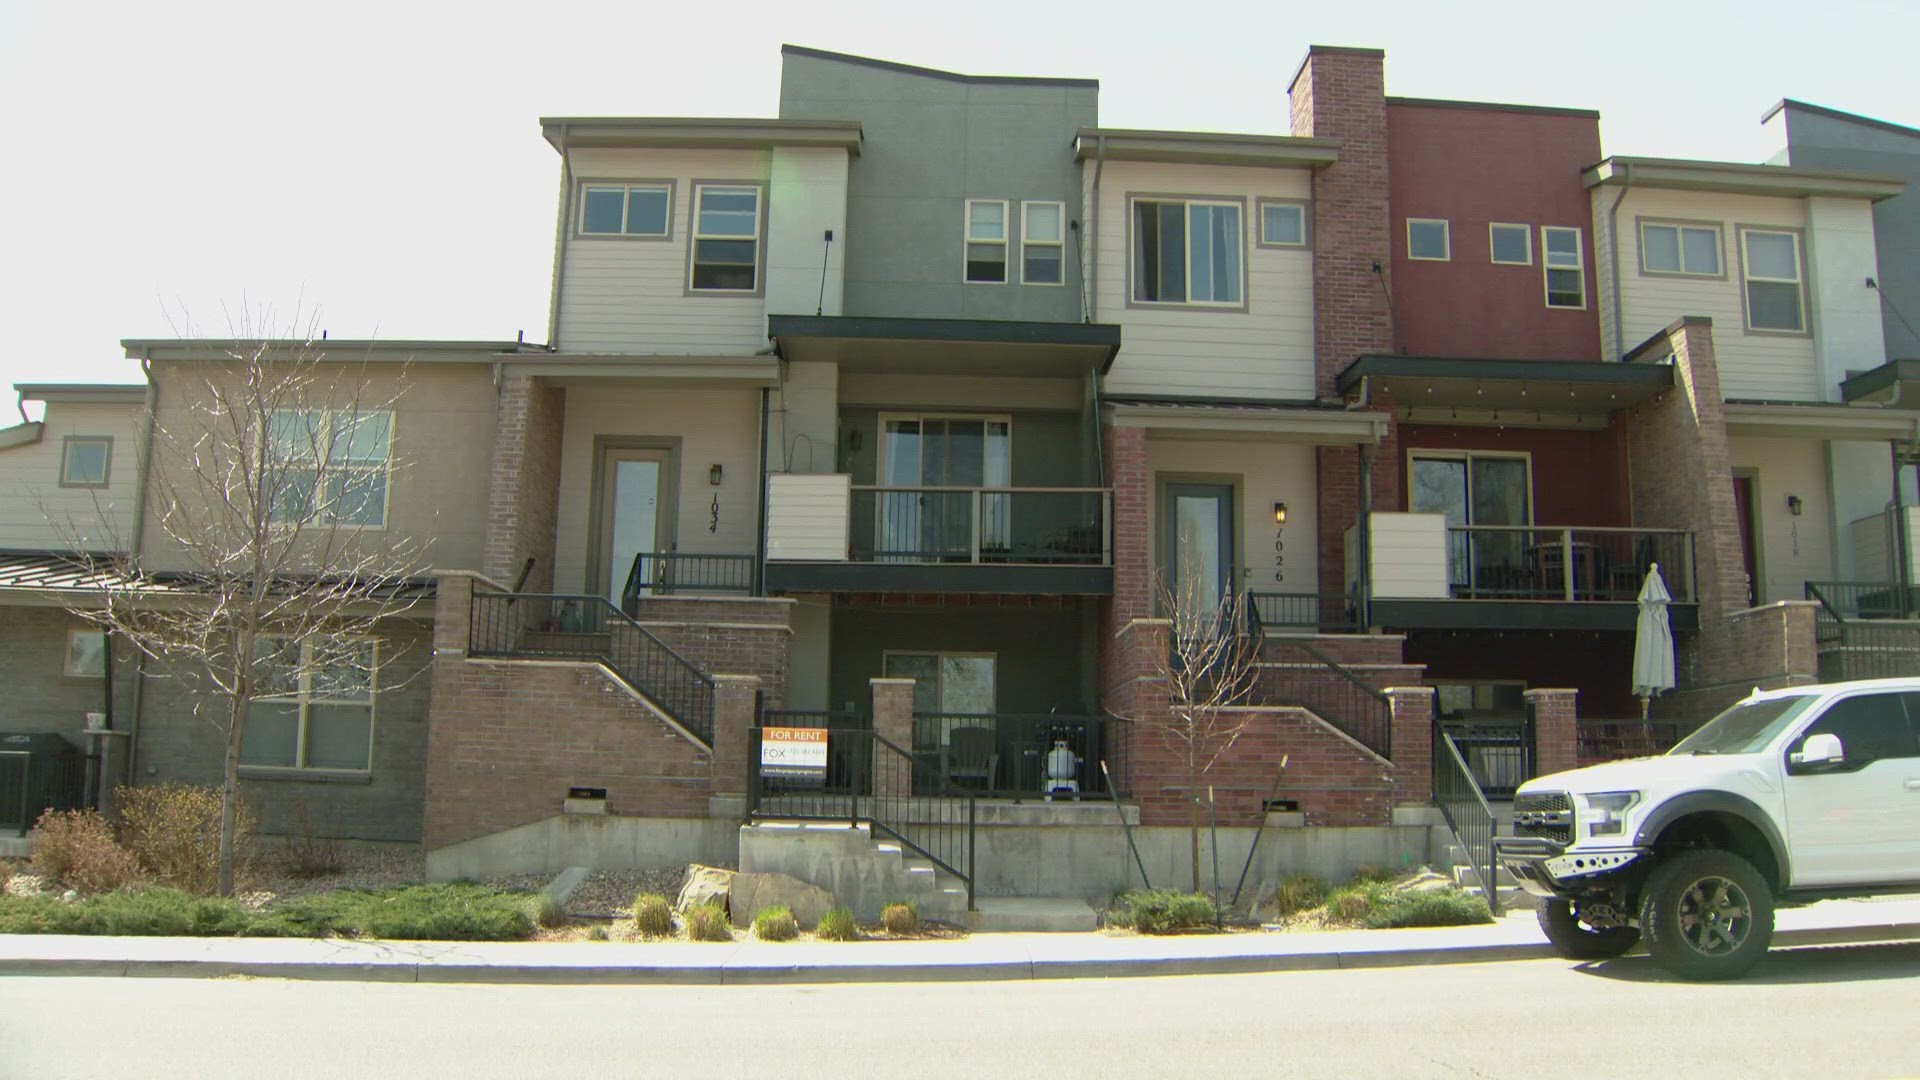 9NEWS real estate expert Lane Lyon looks ahead to 2024 and shares what we can expect for the Denver housing market.